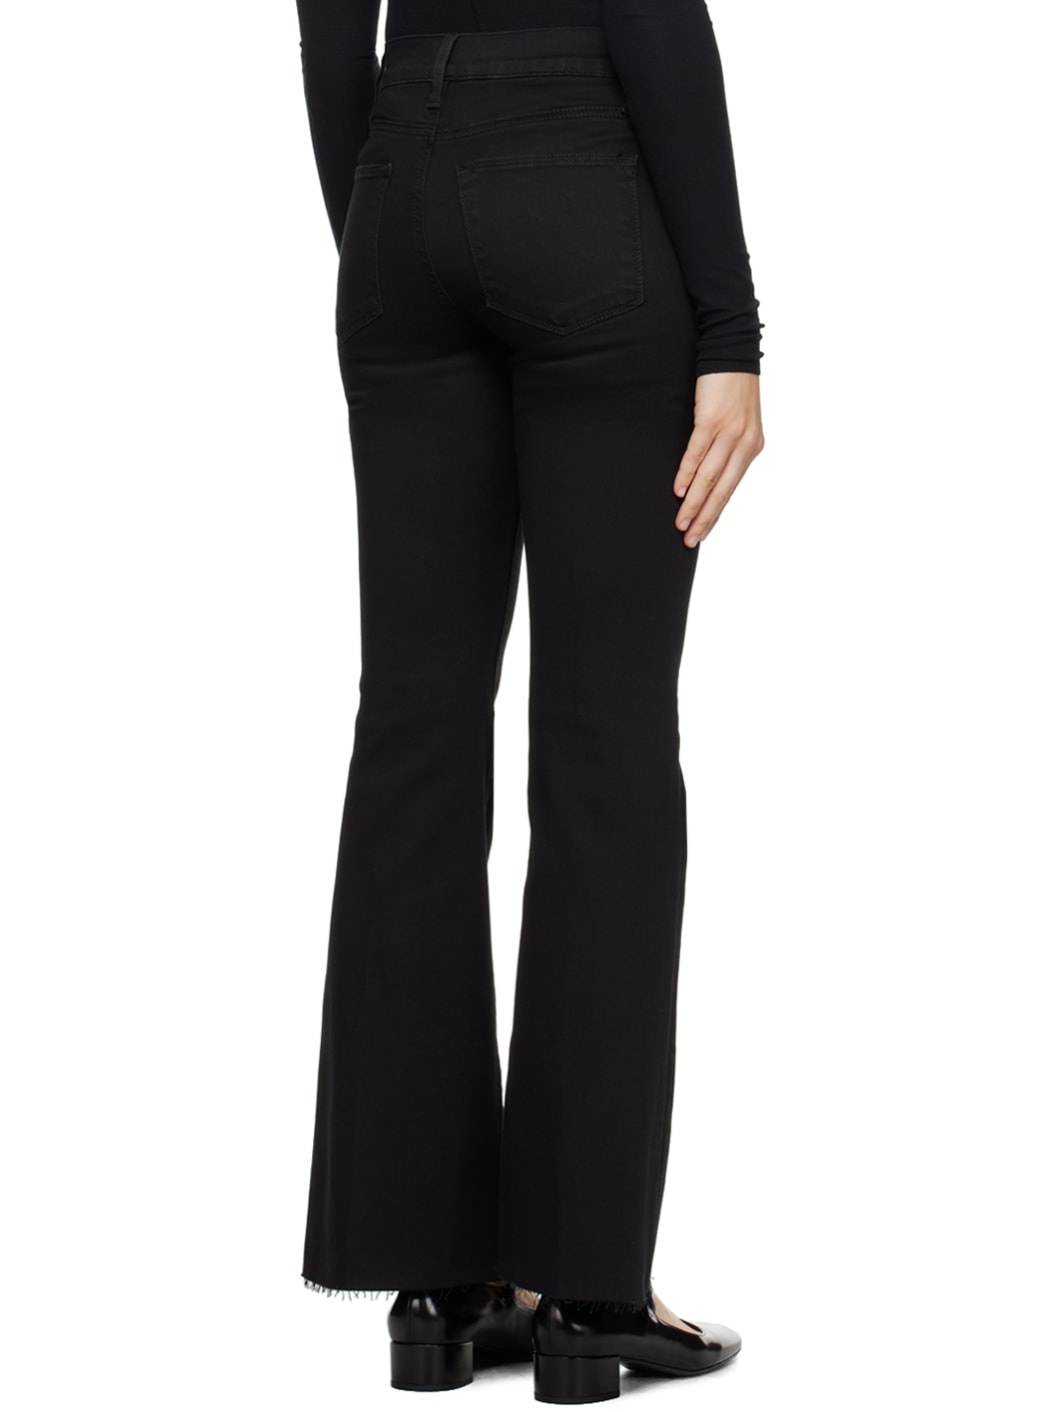 Black 'Le Easy Flare' Jeans - 3